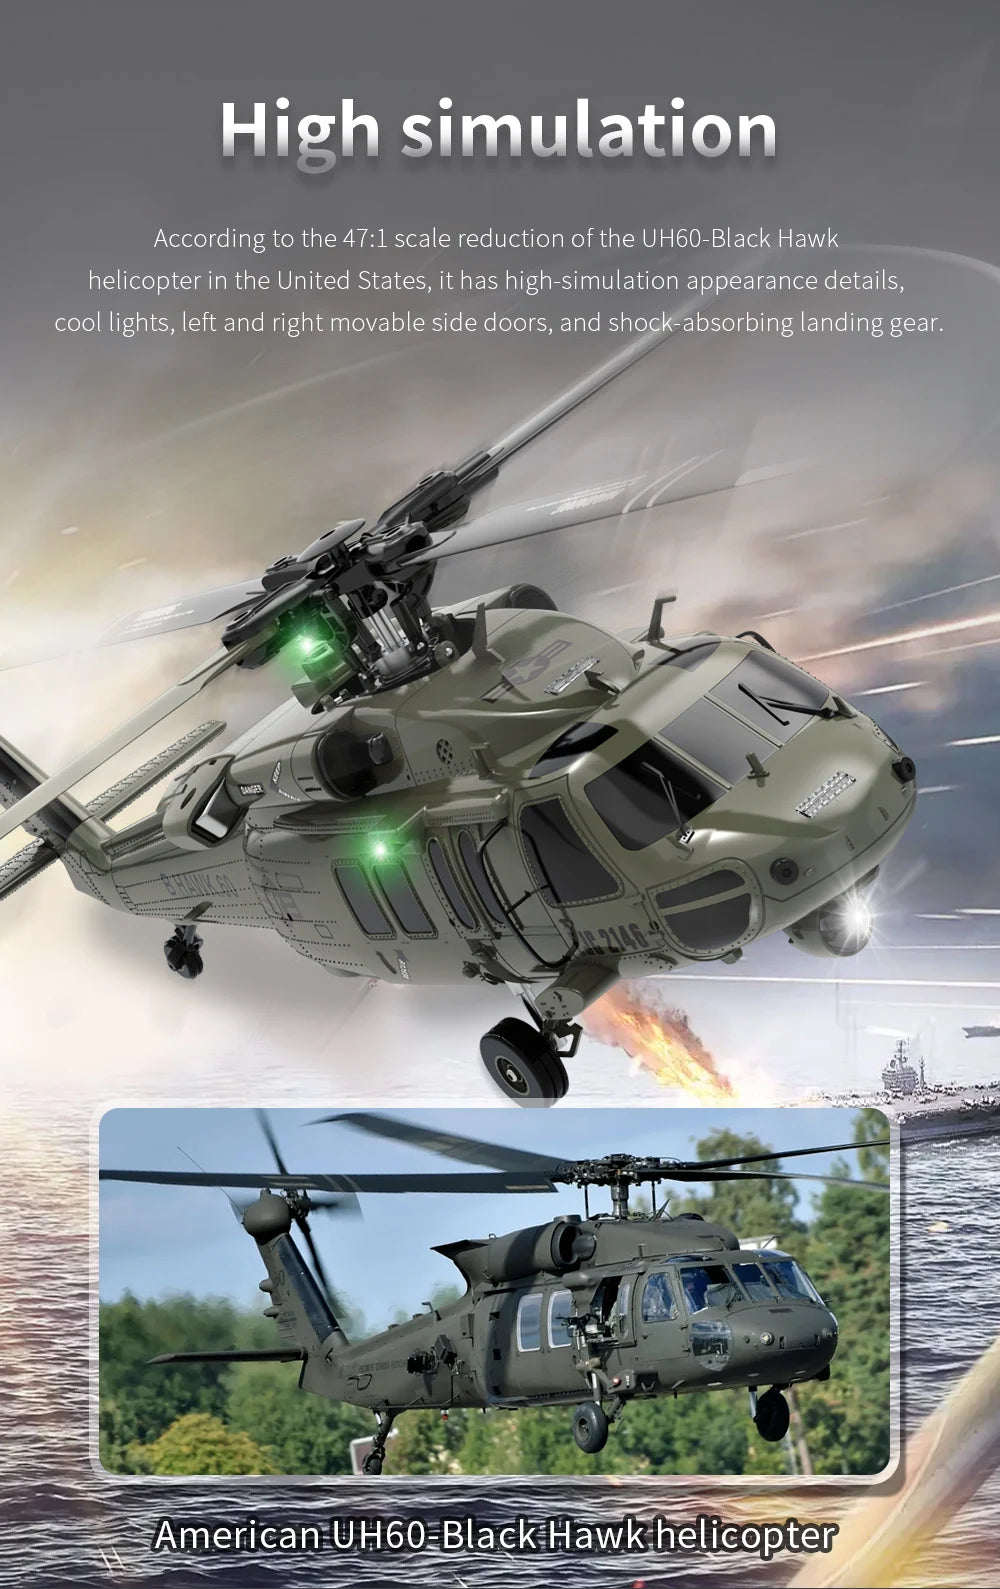 F09 RC Helicopter, high-simulation appearance details, cool lights, left and right movable side doors